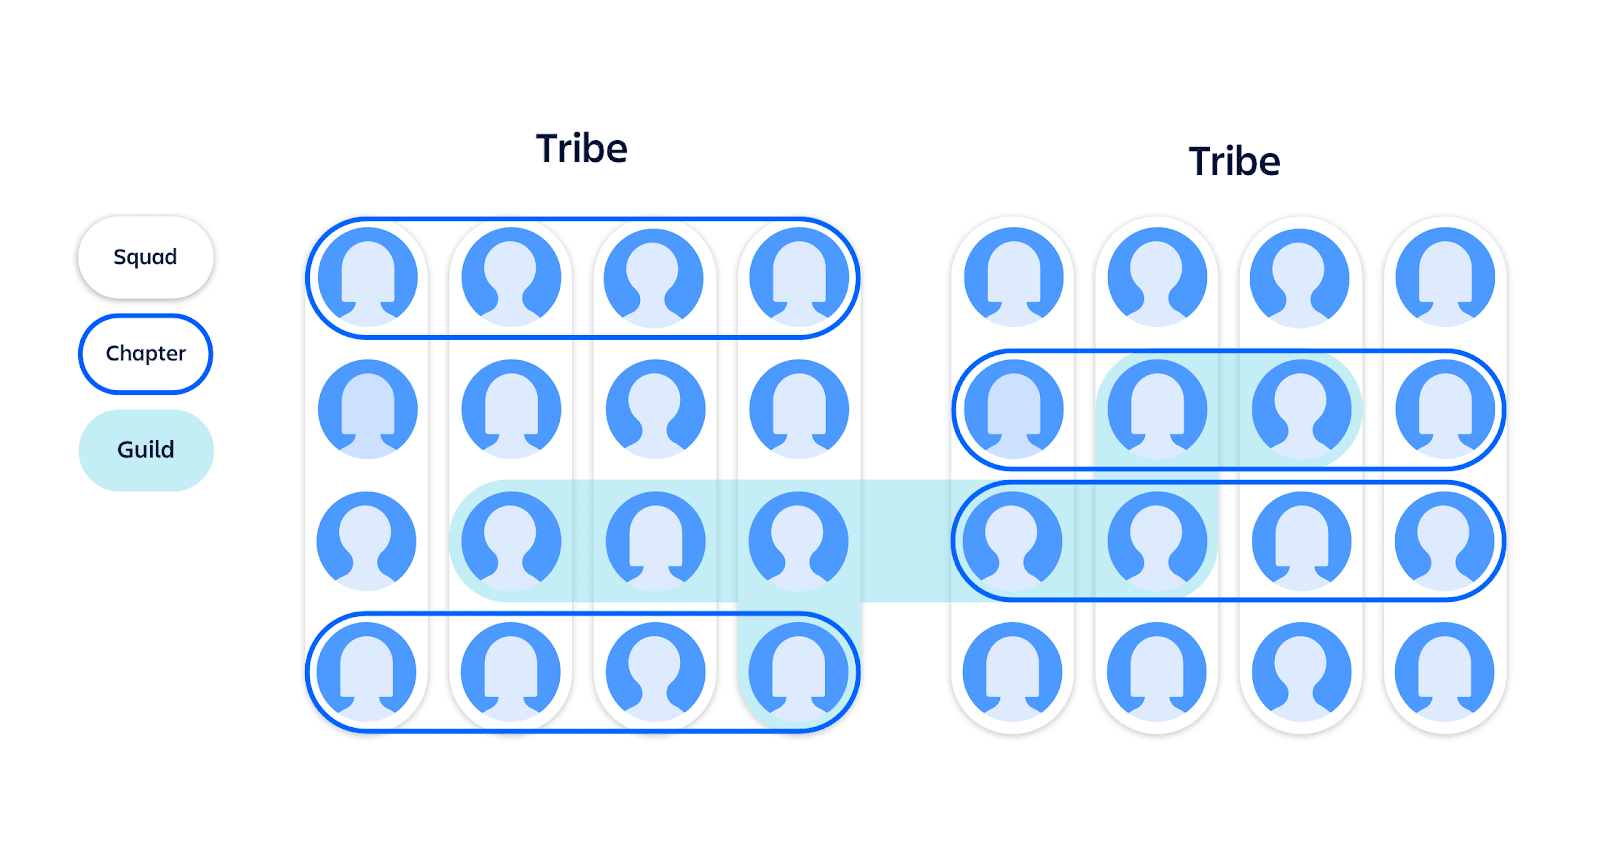 “Spotify Squads” Team Structure